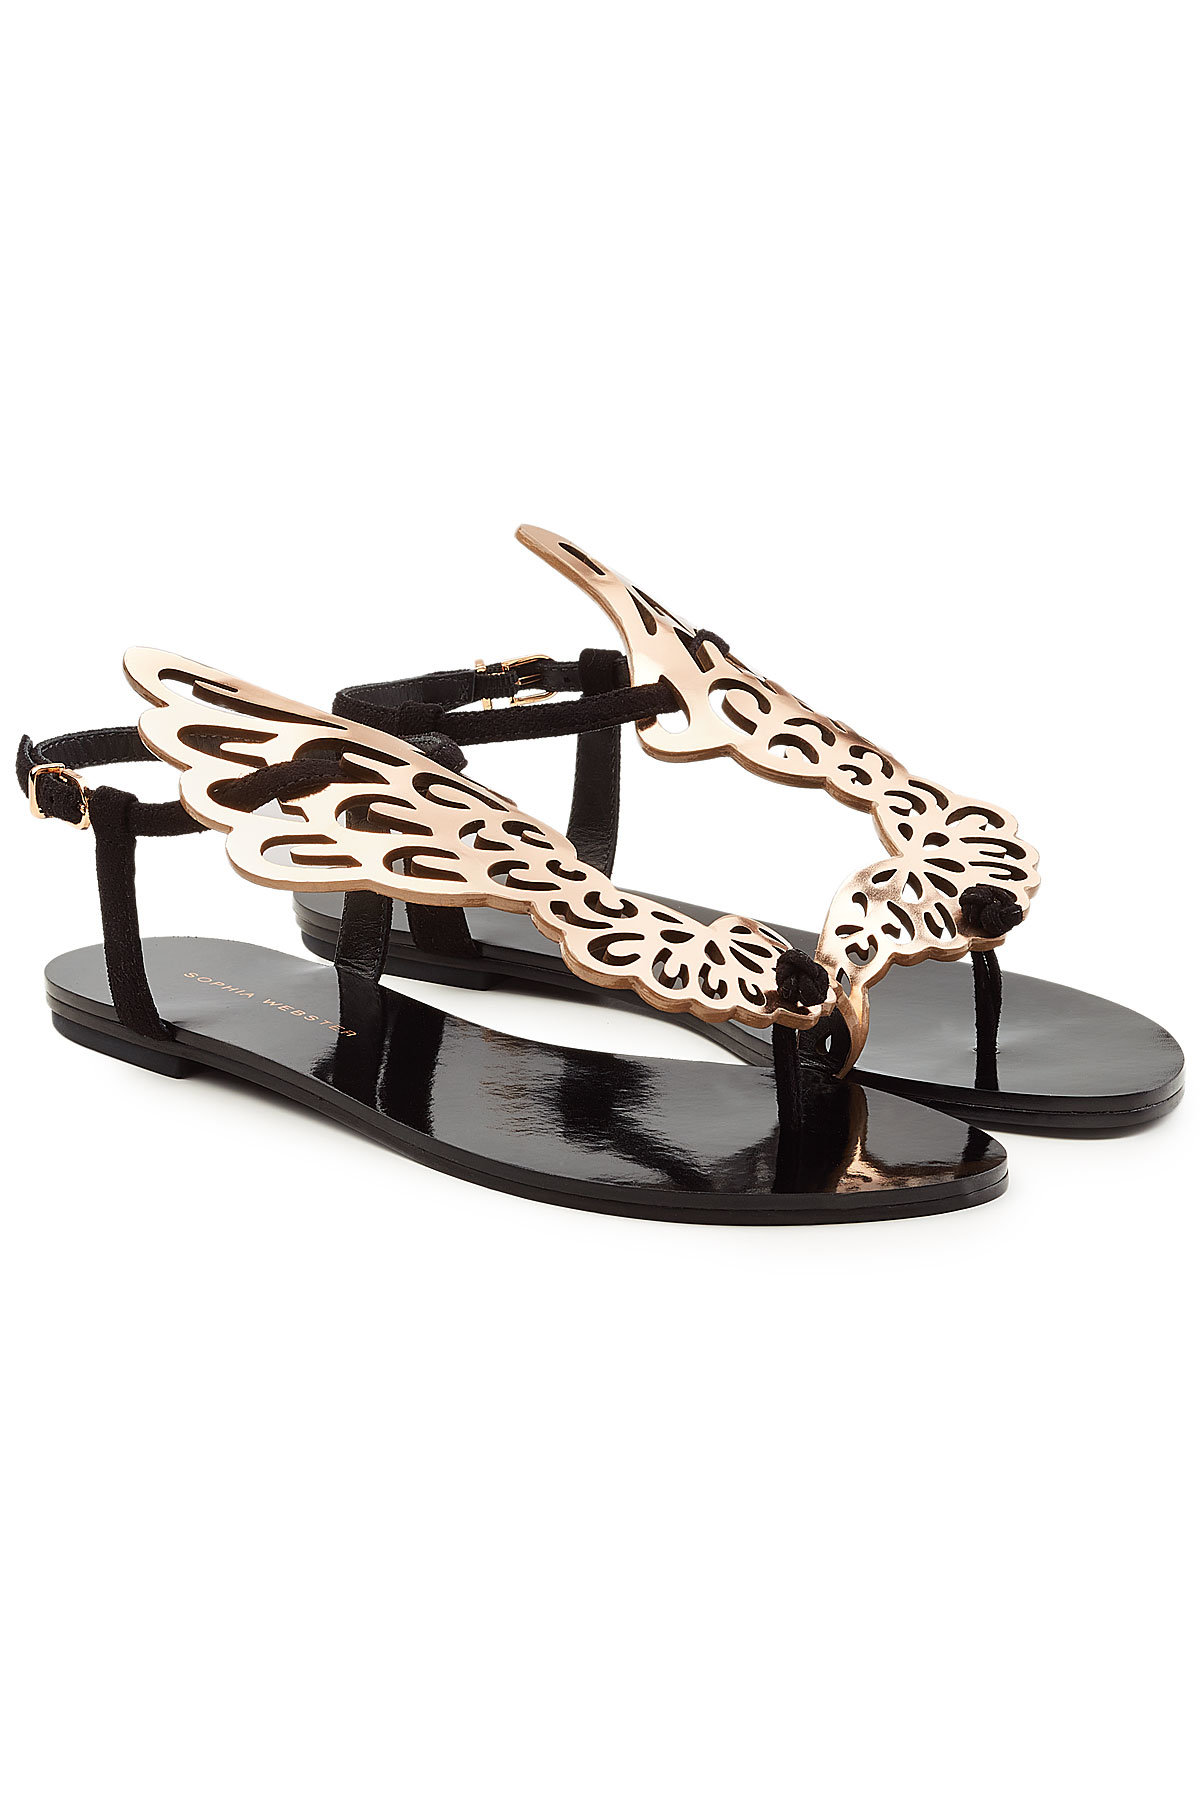 Sophia Webster - Bibi Butterfly Leather and Suede Sandals